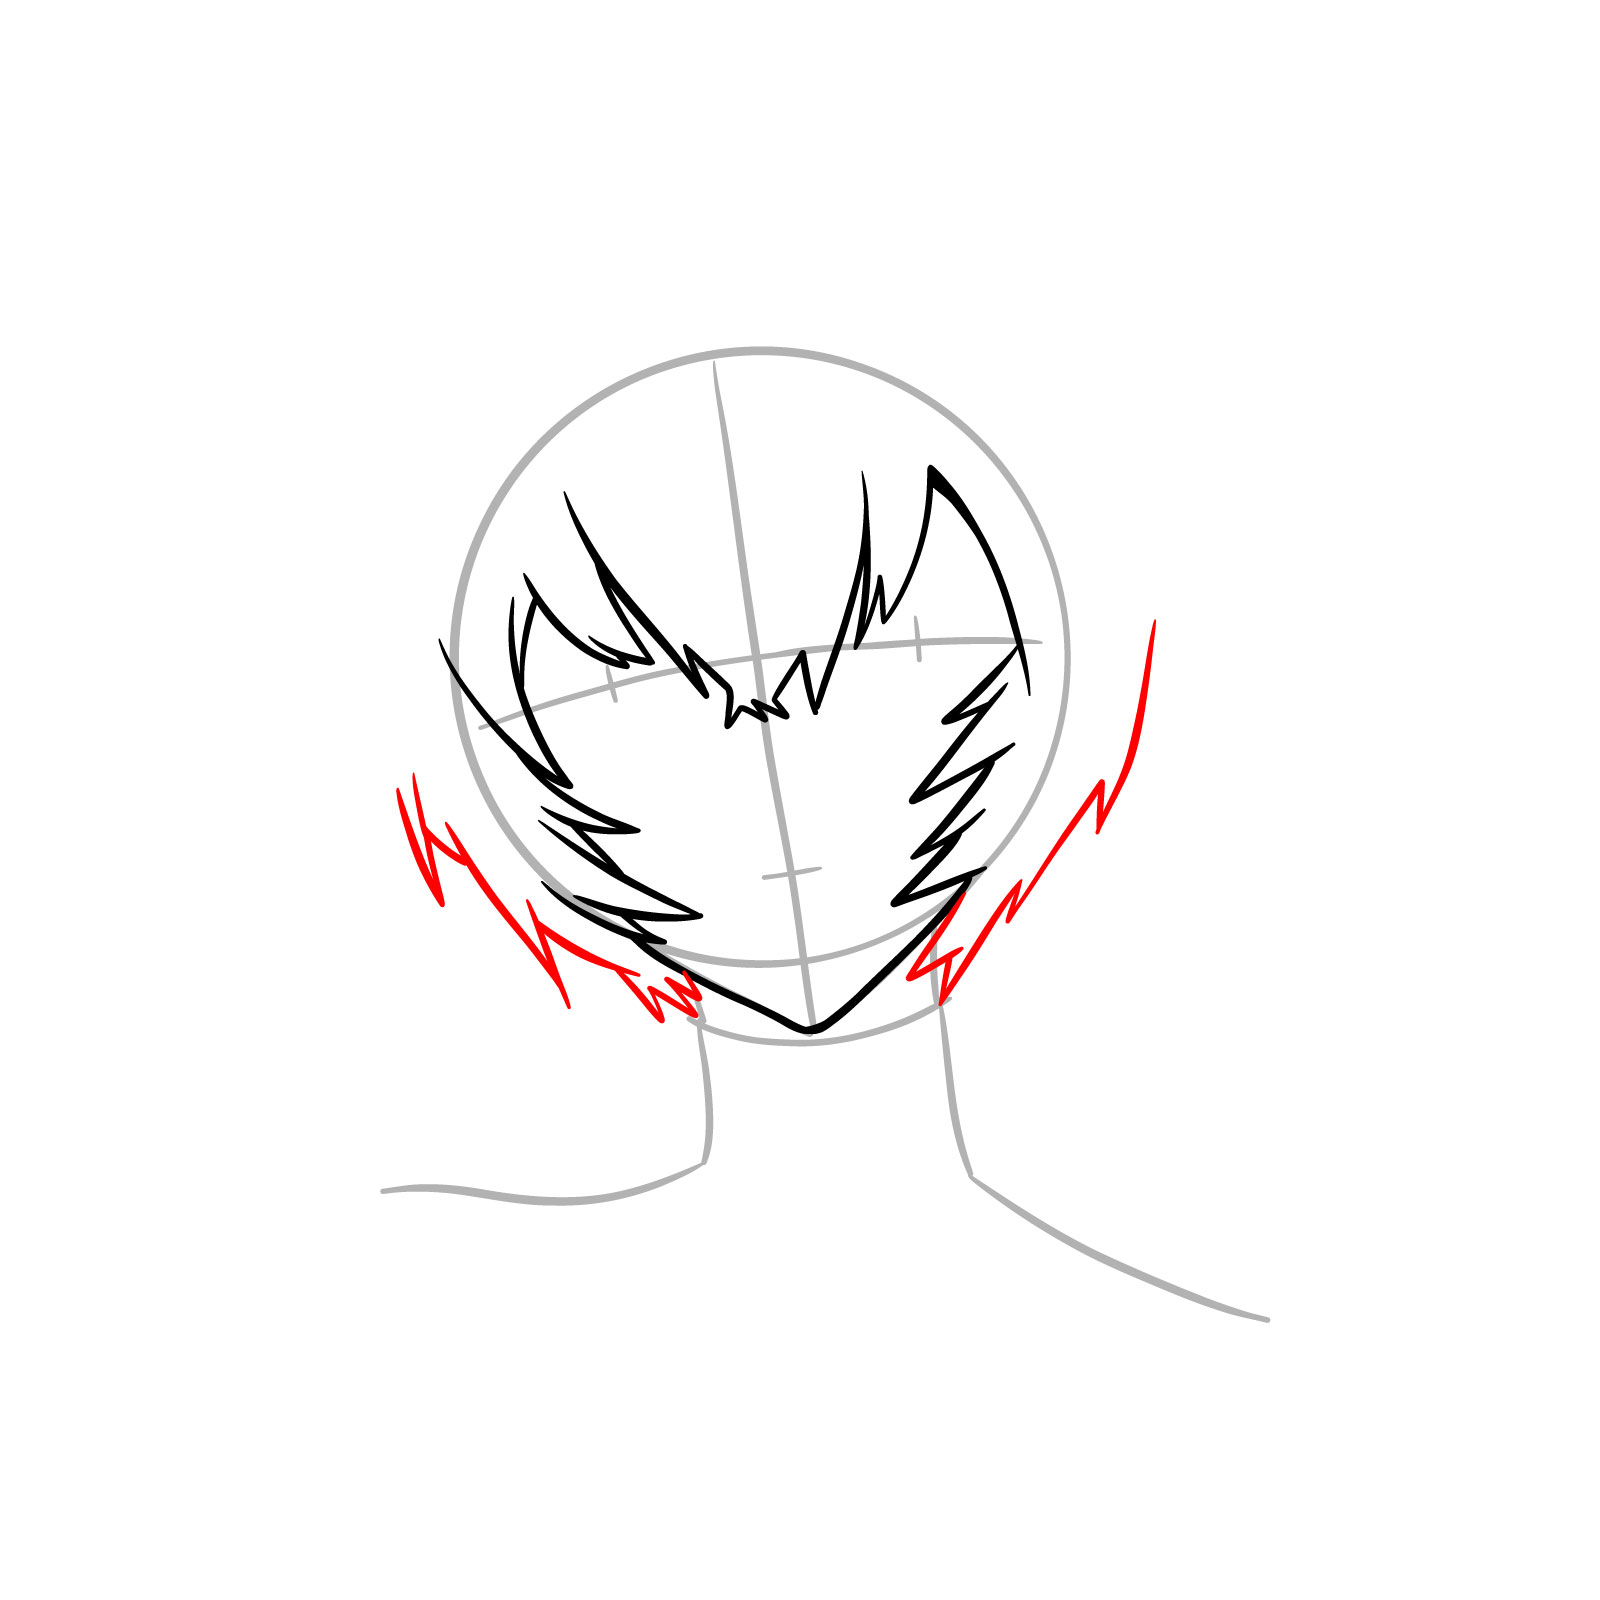 How to draw Rei Ayanami's face - Evangelion - step 06